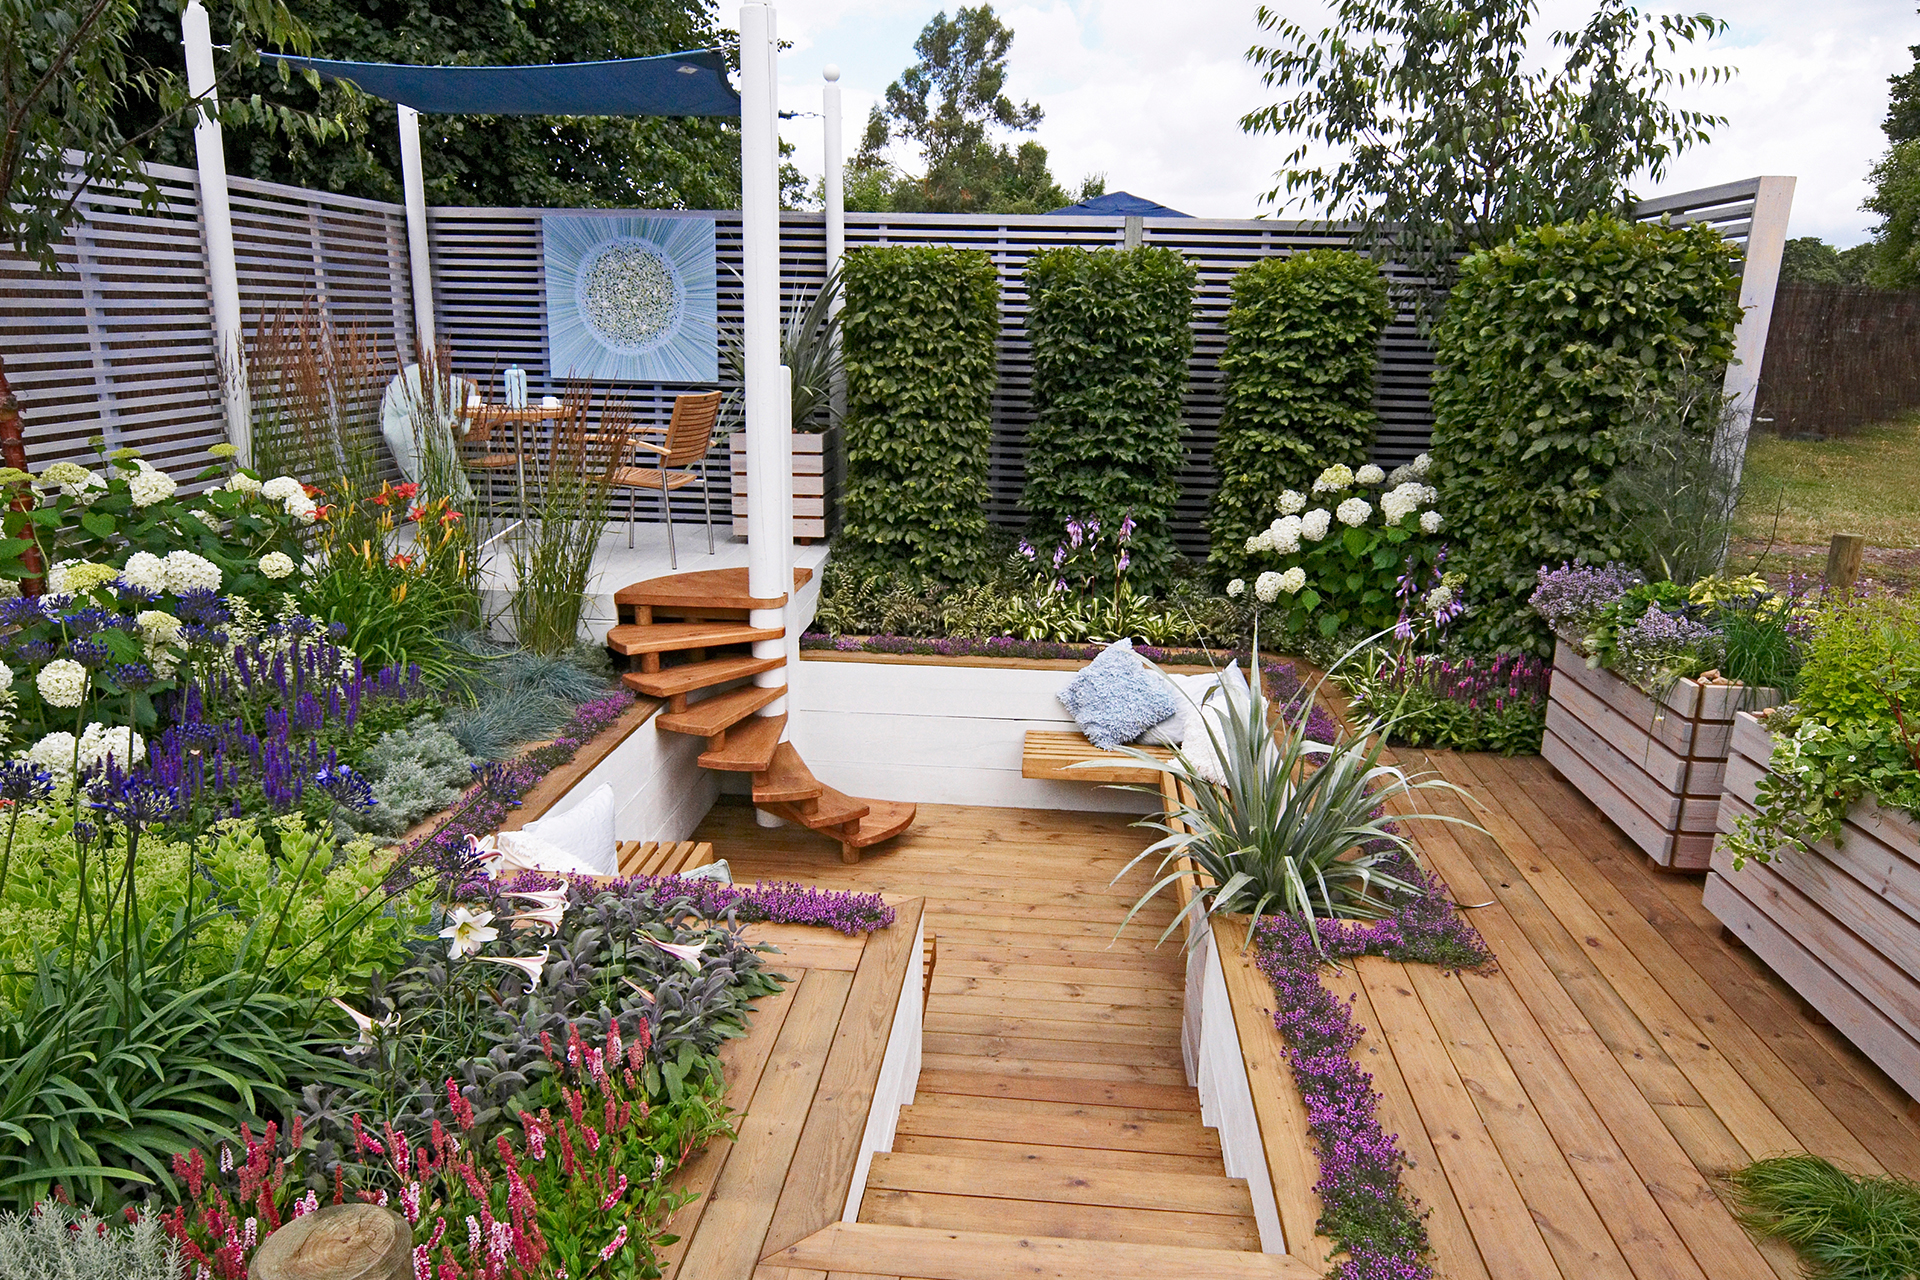 a sunken seating area surrounded by decking and raised beds